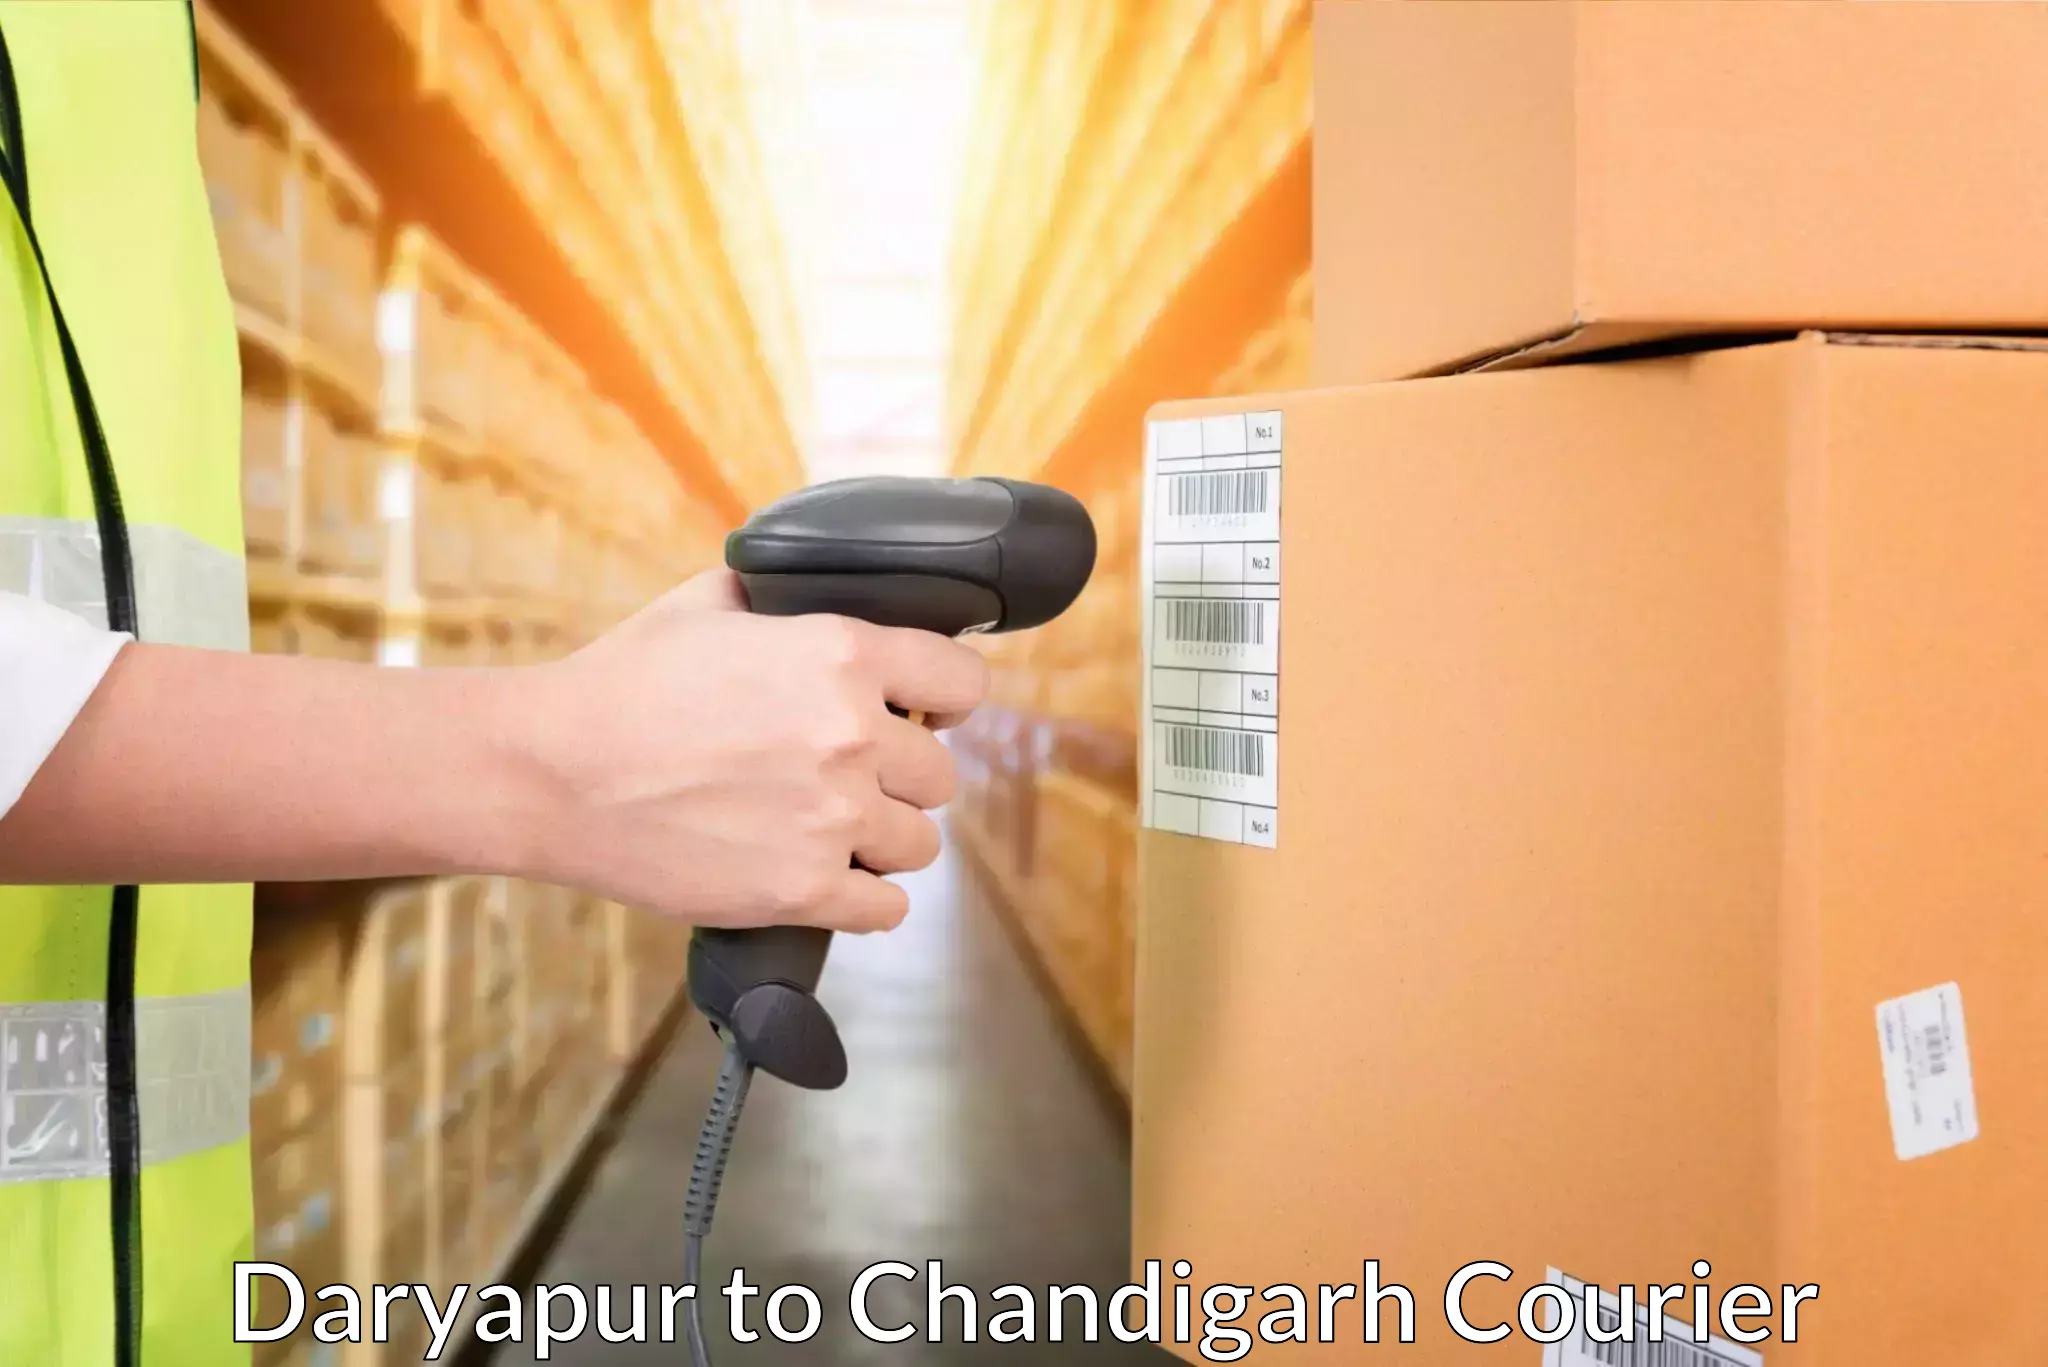 Global freight services Daryapur to Chandigarh